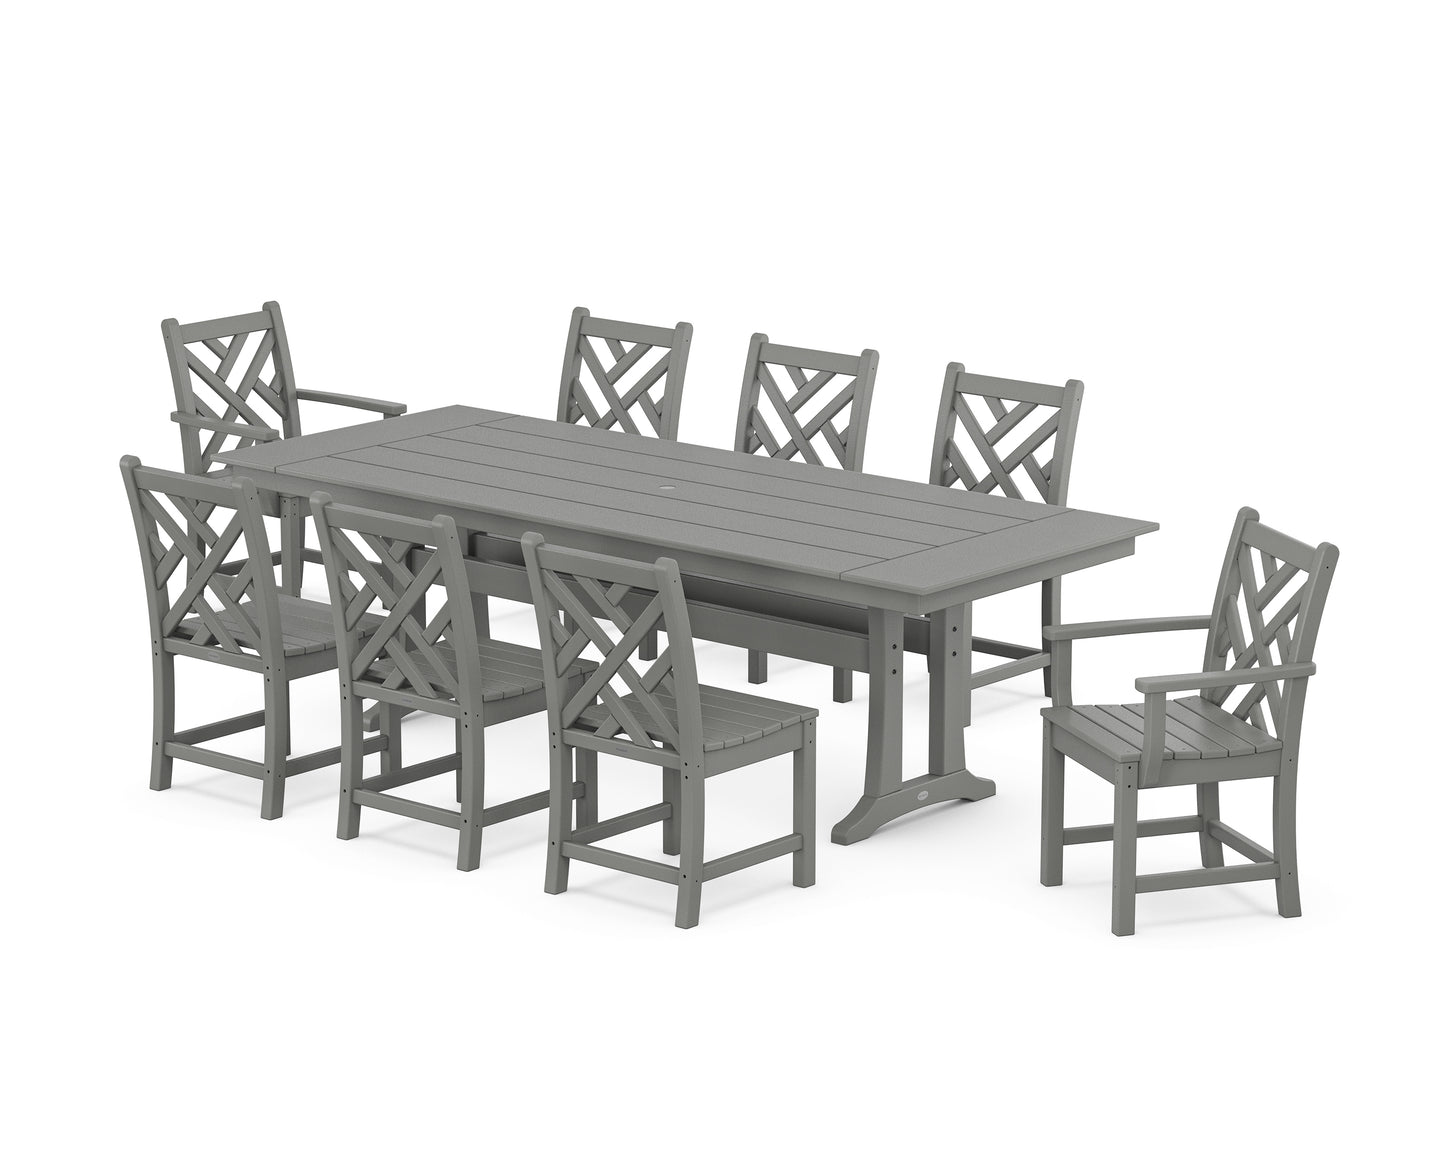 Chippendale 9-Piece Farmhouse Dining Set with Trestle Legs